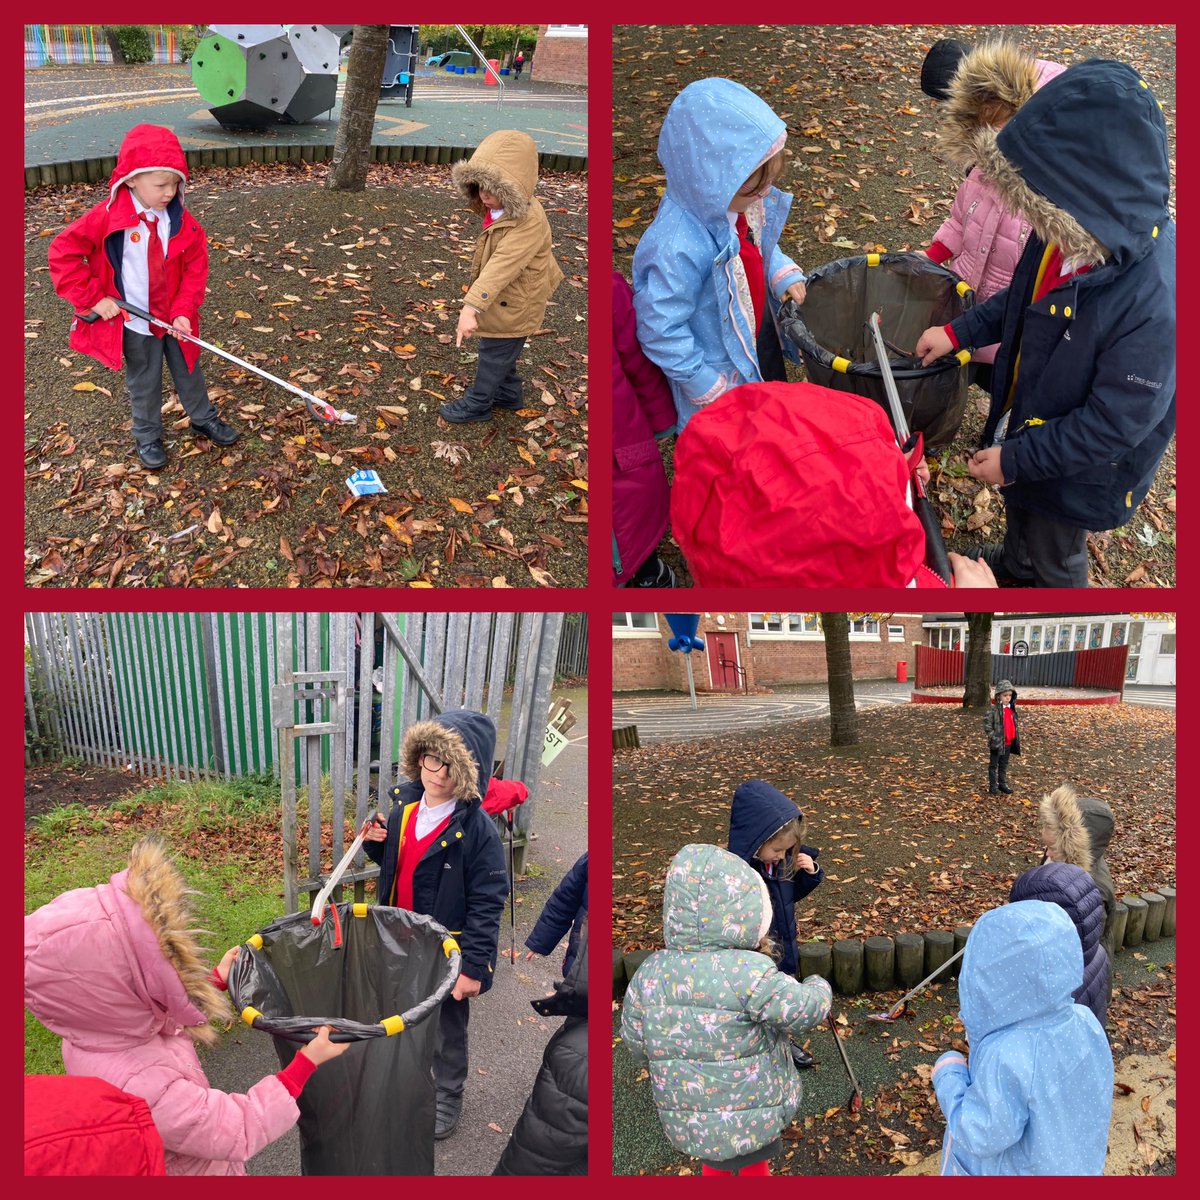 P1b have been celebrating lots of success this week ⭐️ We have worked hard on numbers & sounds, described the character of the witch from ‘Room on the Broom’ & as part of our Garden Committee duties, had a litter pick in and around our garden. Good job everyone! 😊🧙‍♀️🤩🪴